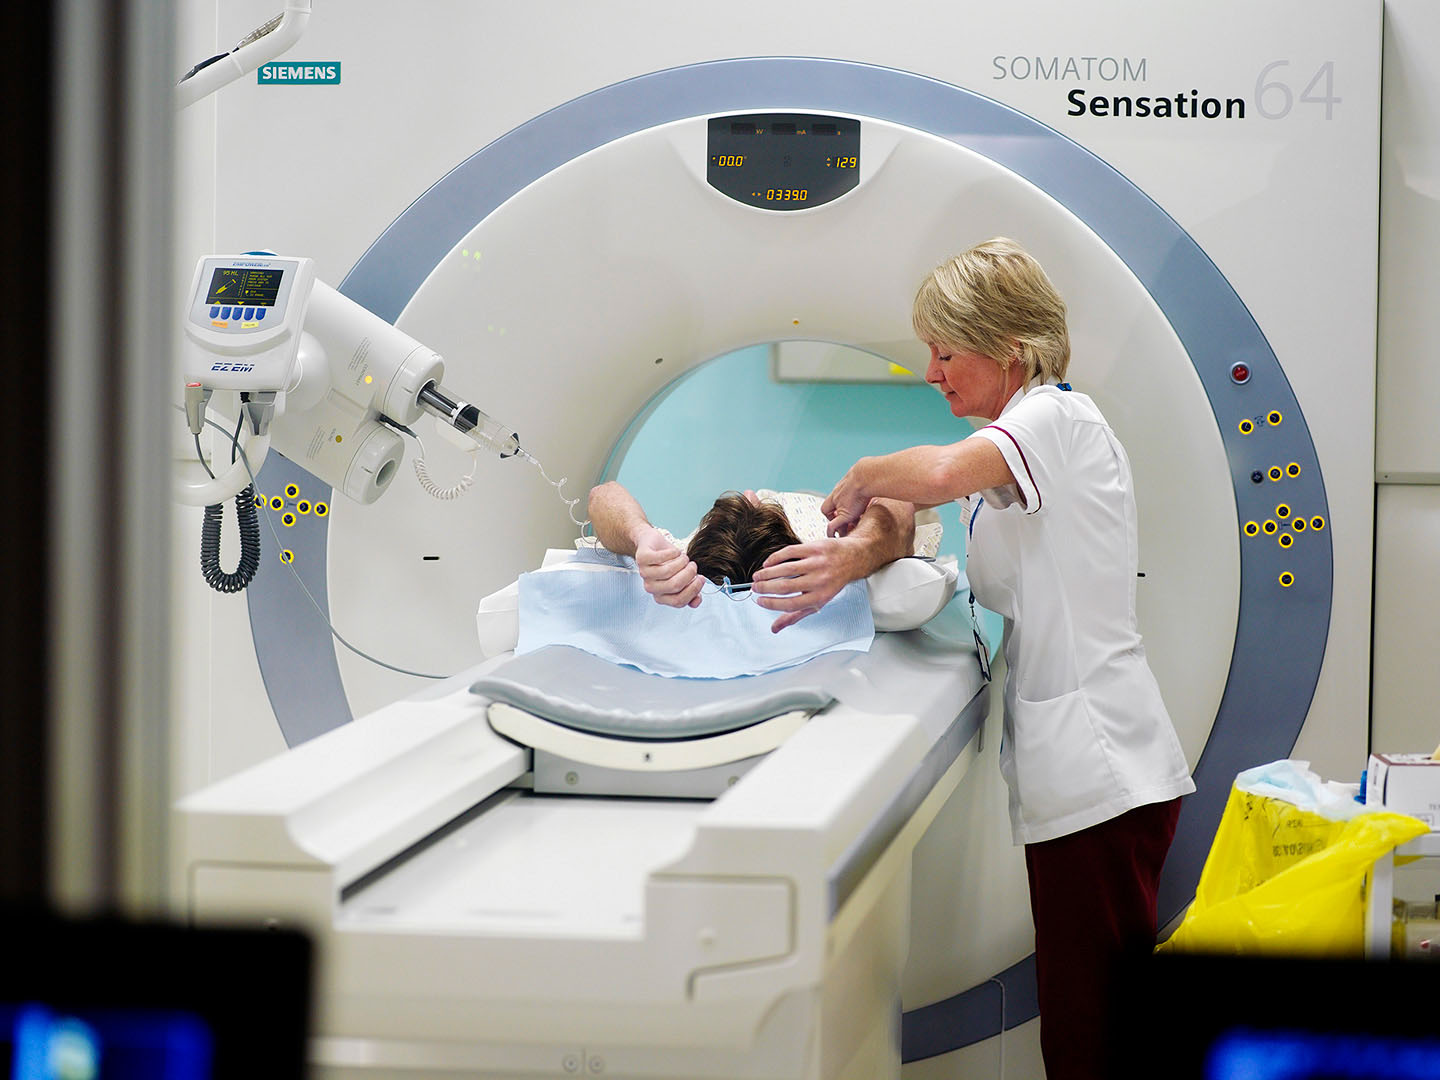 Radigrapher with patient preparing for CT Scan